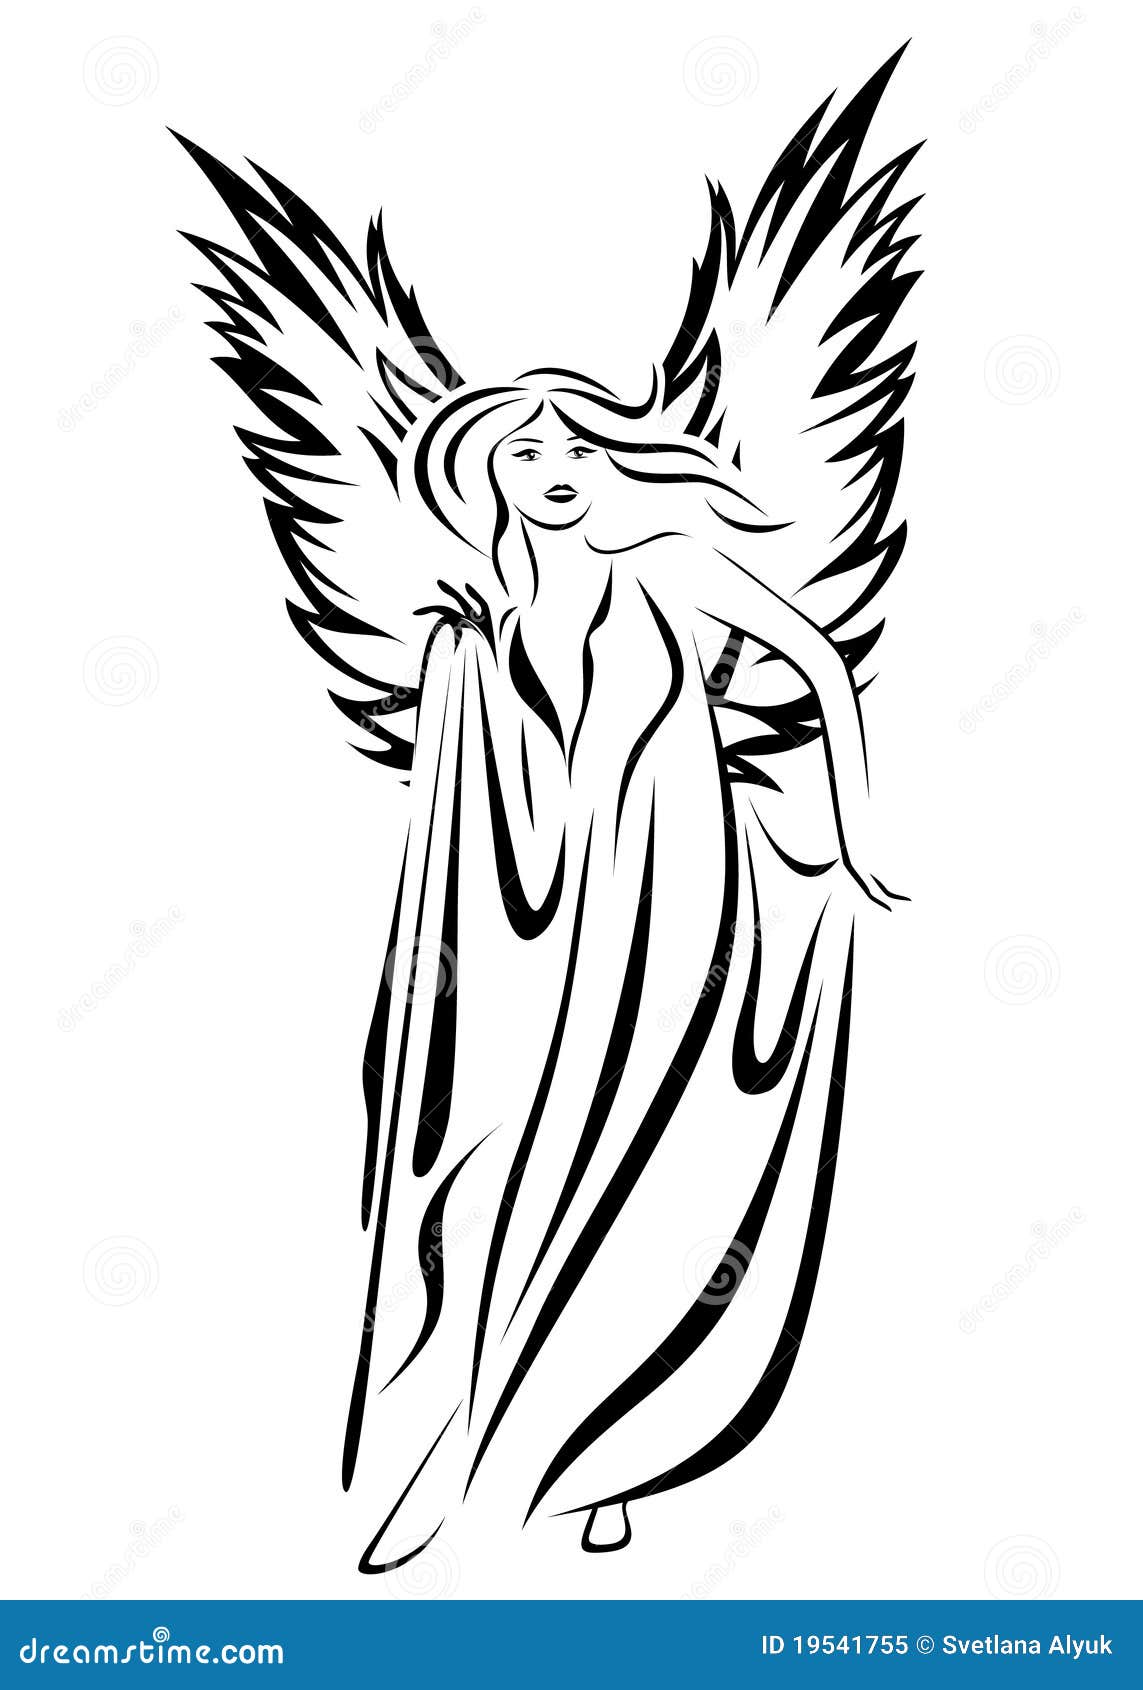 Guardian Angel Drawing Vector Images (over 190)